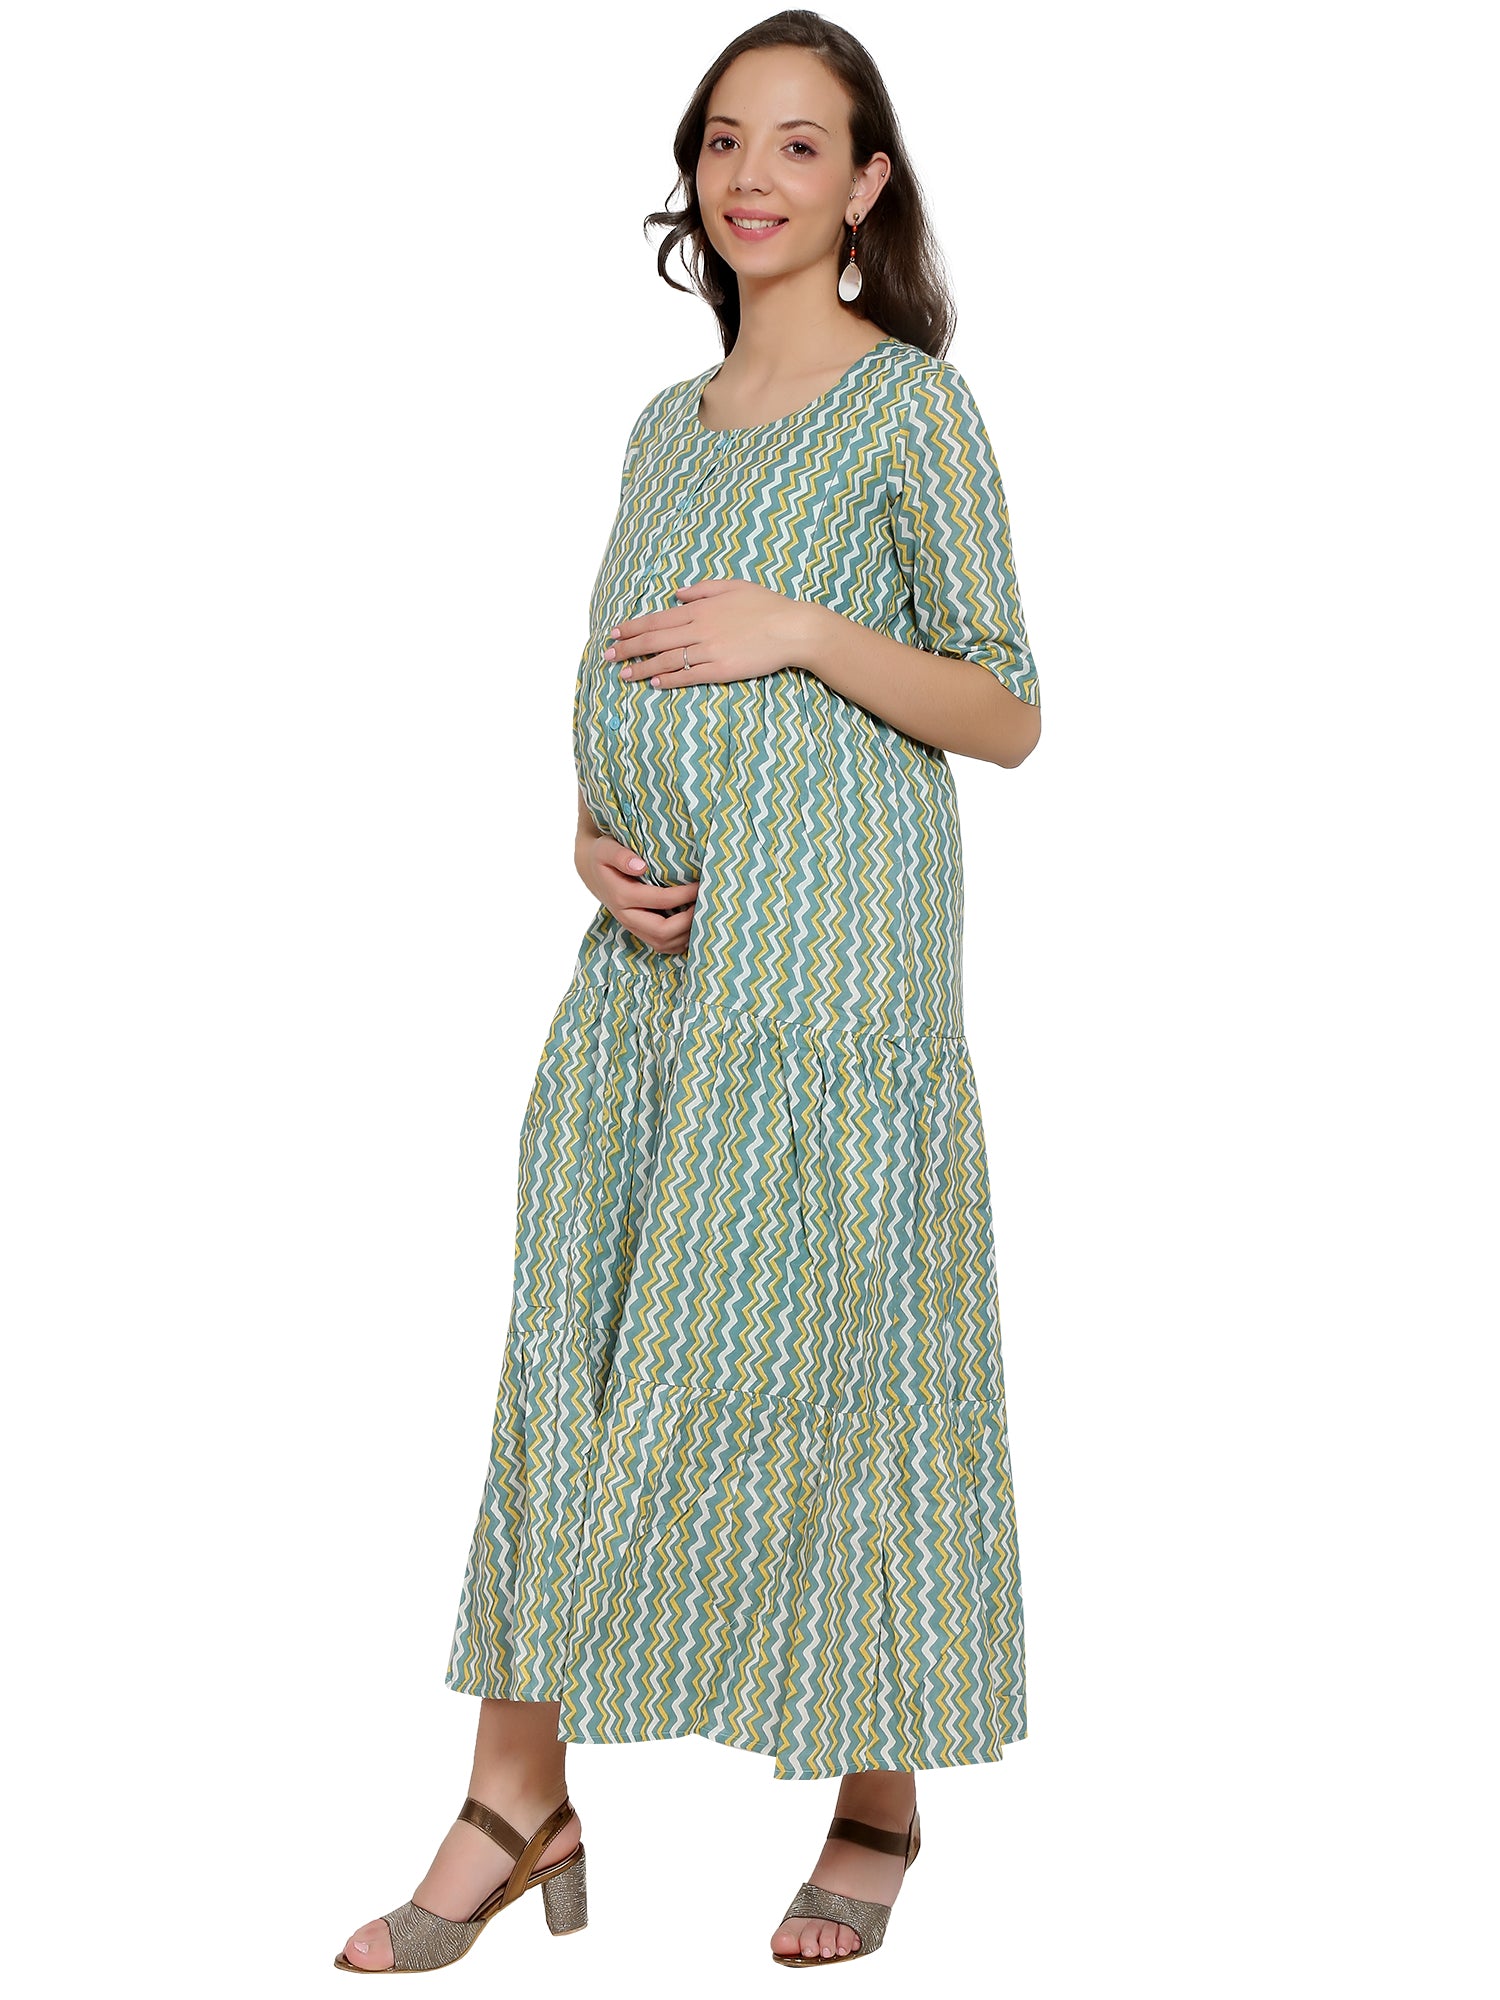 Multicolor Layered Cotton Maternity and Feeding Full Length Dress